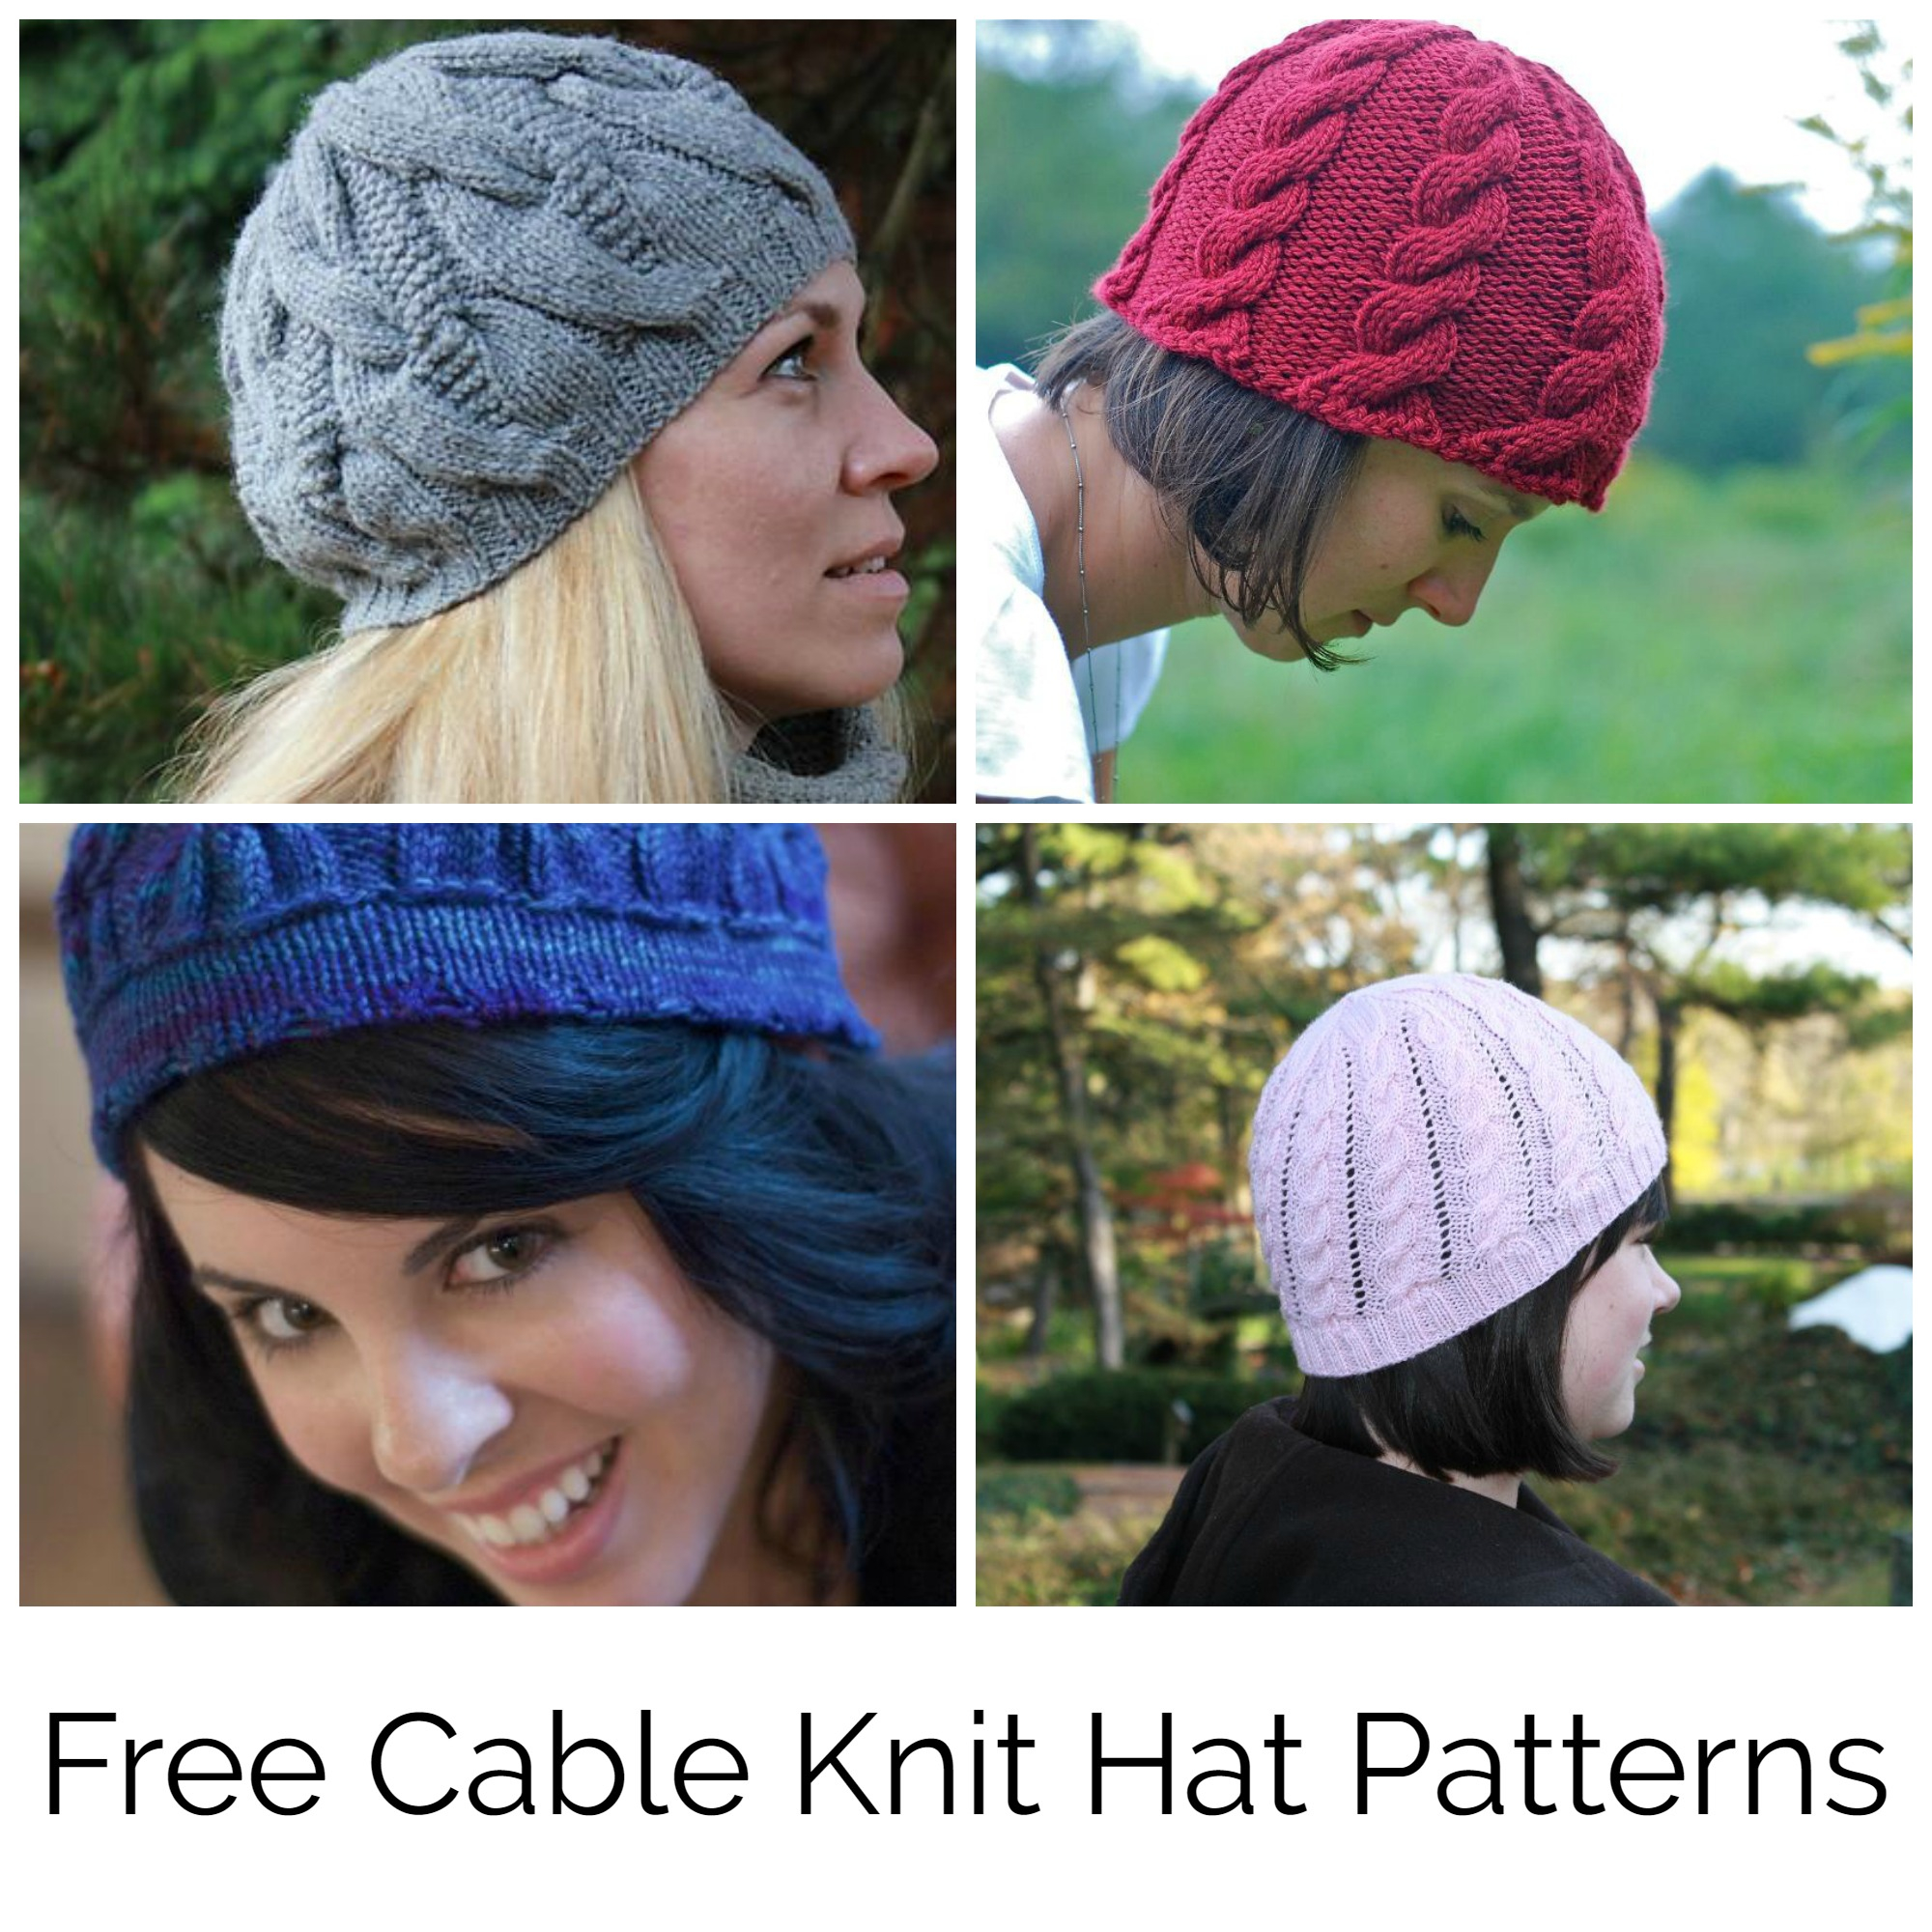 Free Patterns For Knitted Hats Find Your Favorite Free Cable Knit Hat Pattern